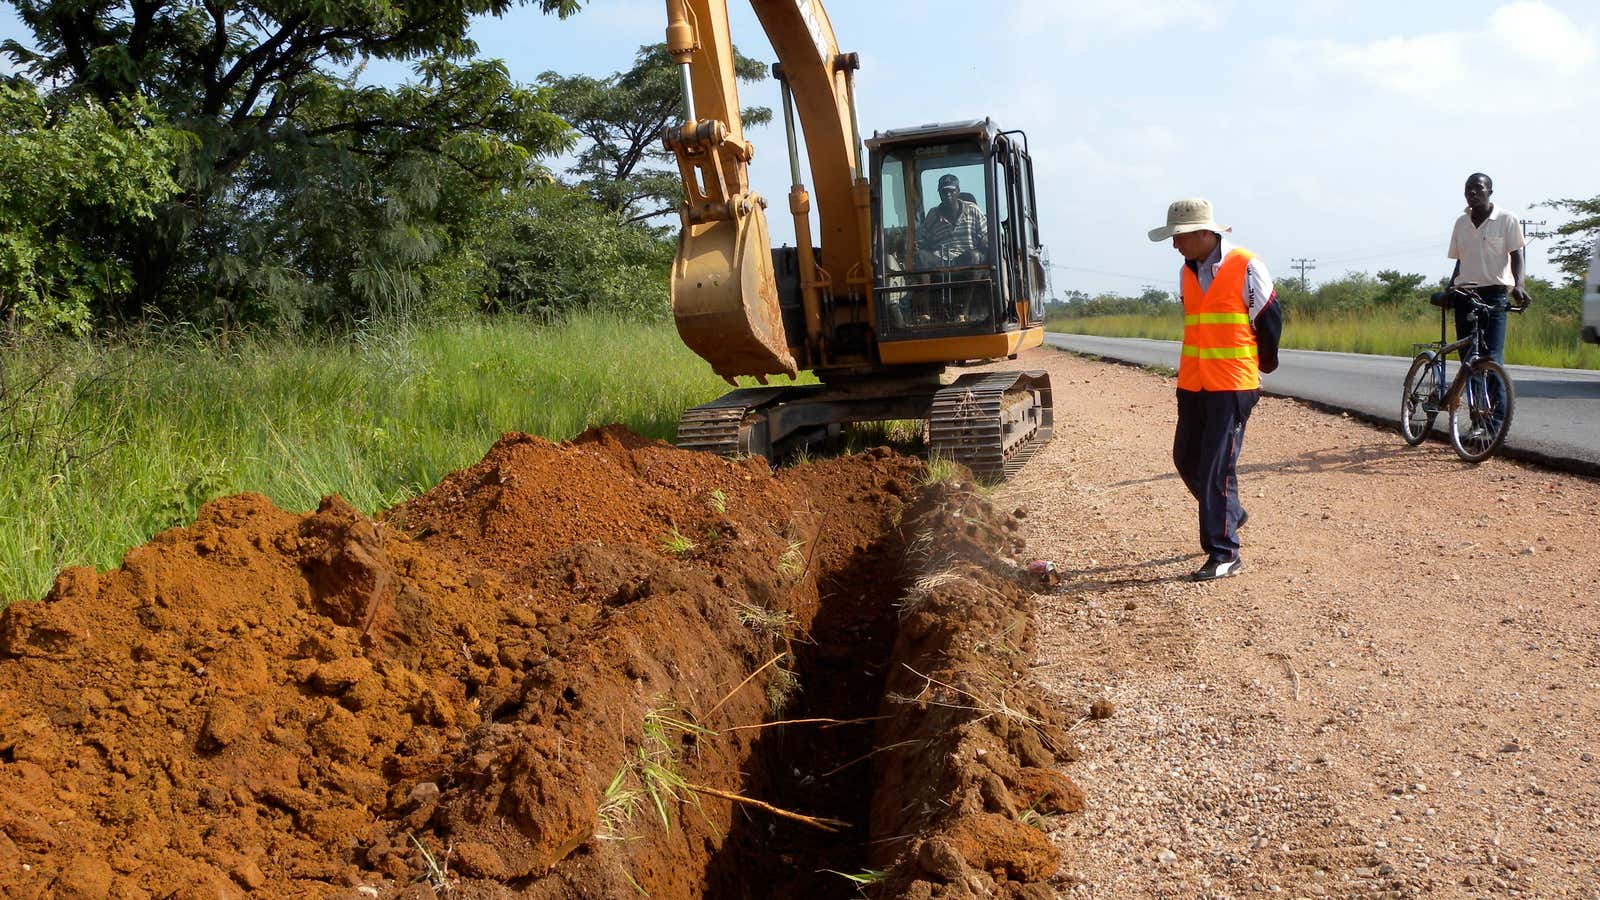 Cassava Technologies is creating infrastructure for fast, reliable and affordable internet in Africa.